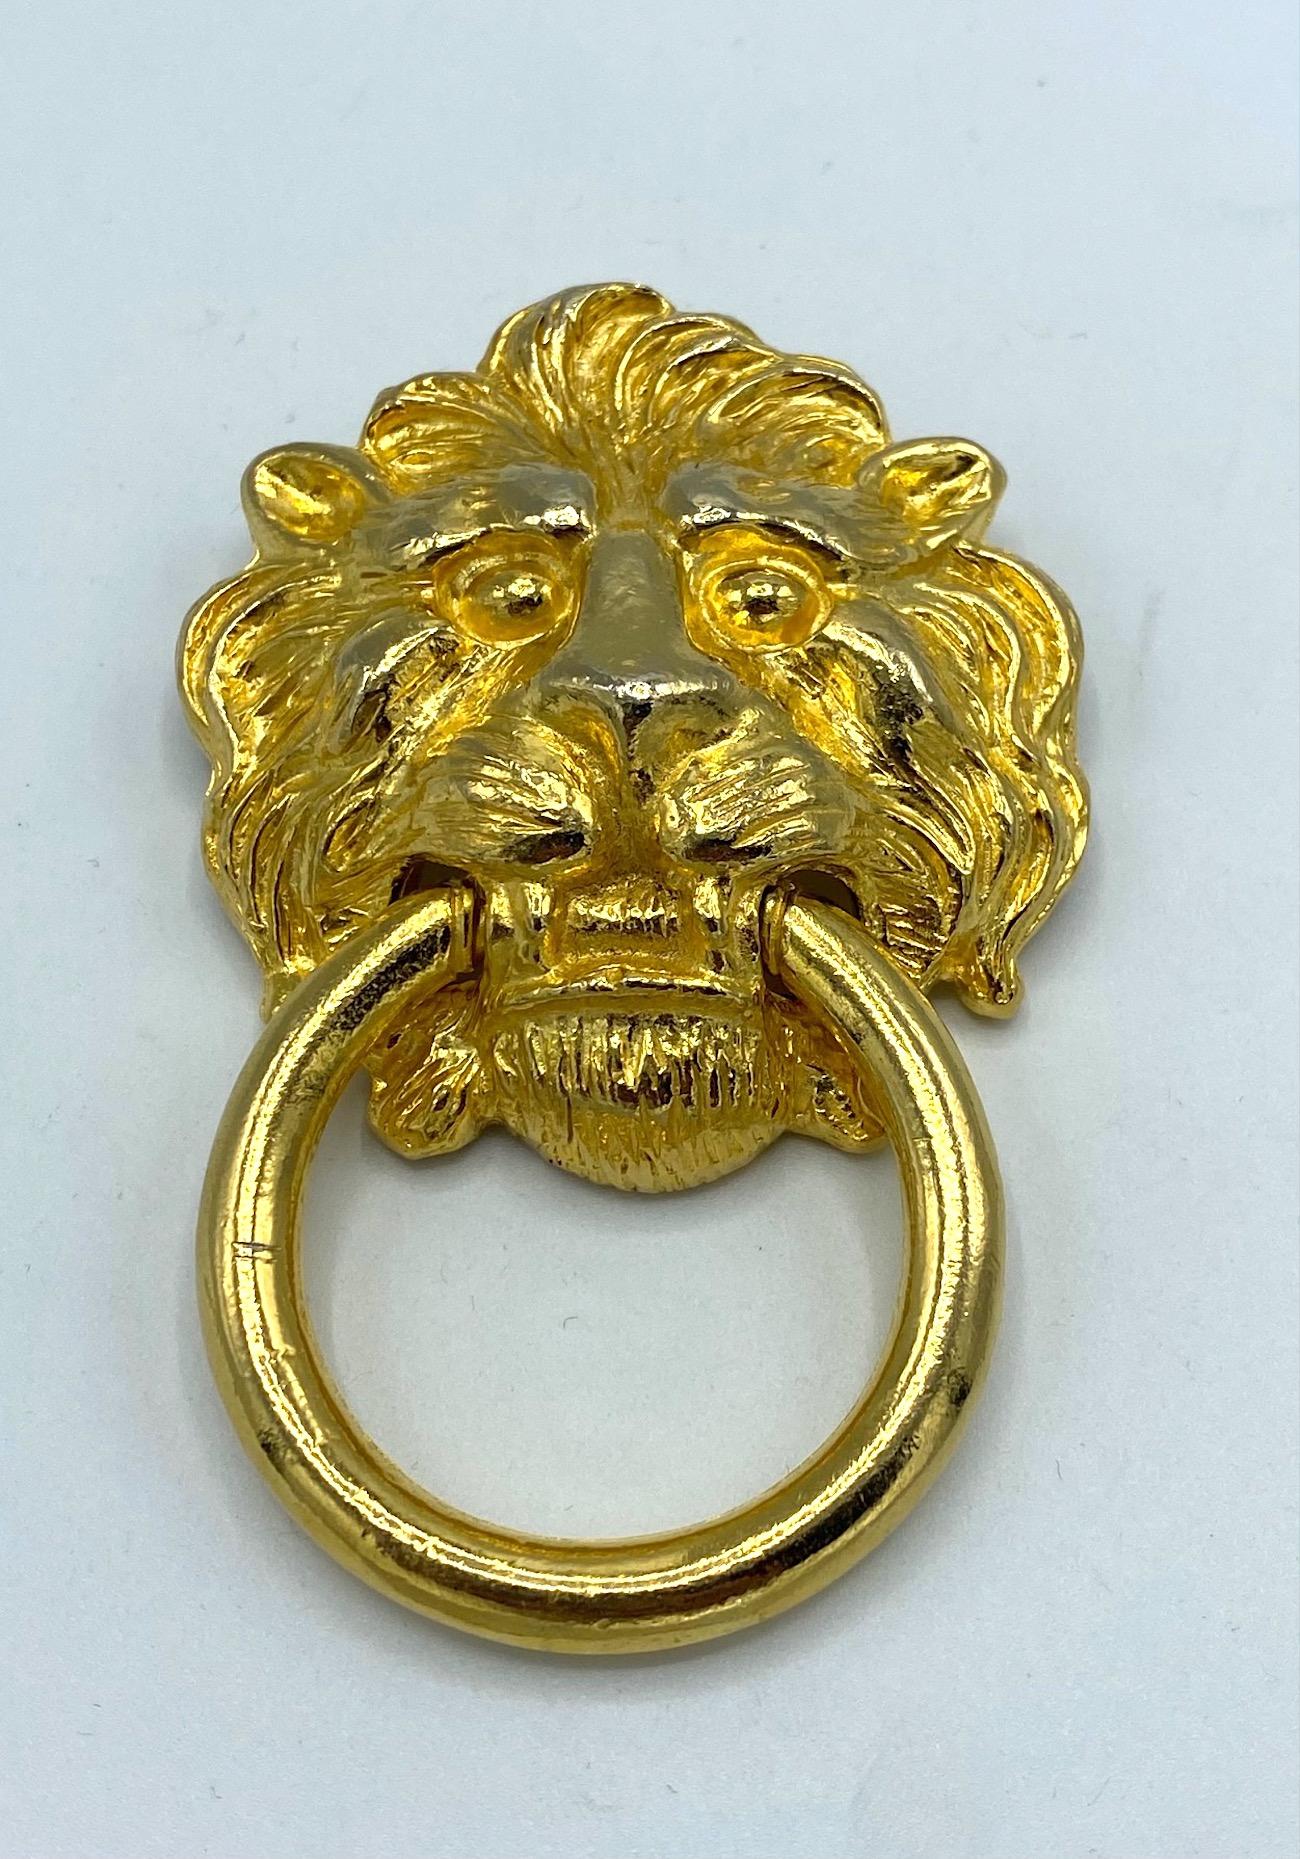 A very very nice and classic lion face with ring door knocker style brooch from the 1980s by Kenneth Jay Lane. It is beautifully cast and carved with attention to the lion's mane and plated in a rich warm gold. The 1.75 inch diameter ring hangs